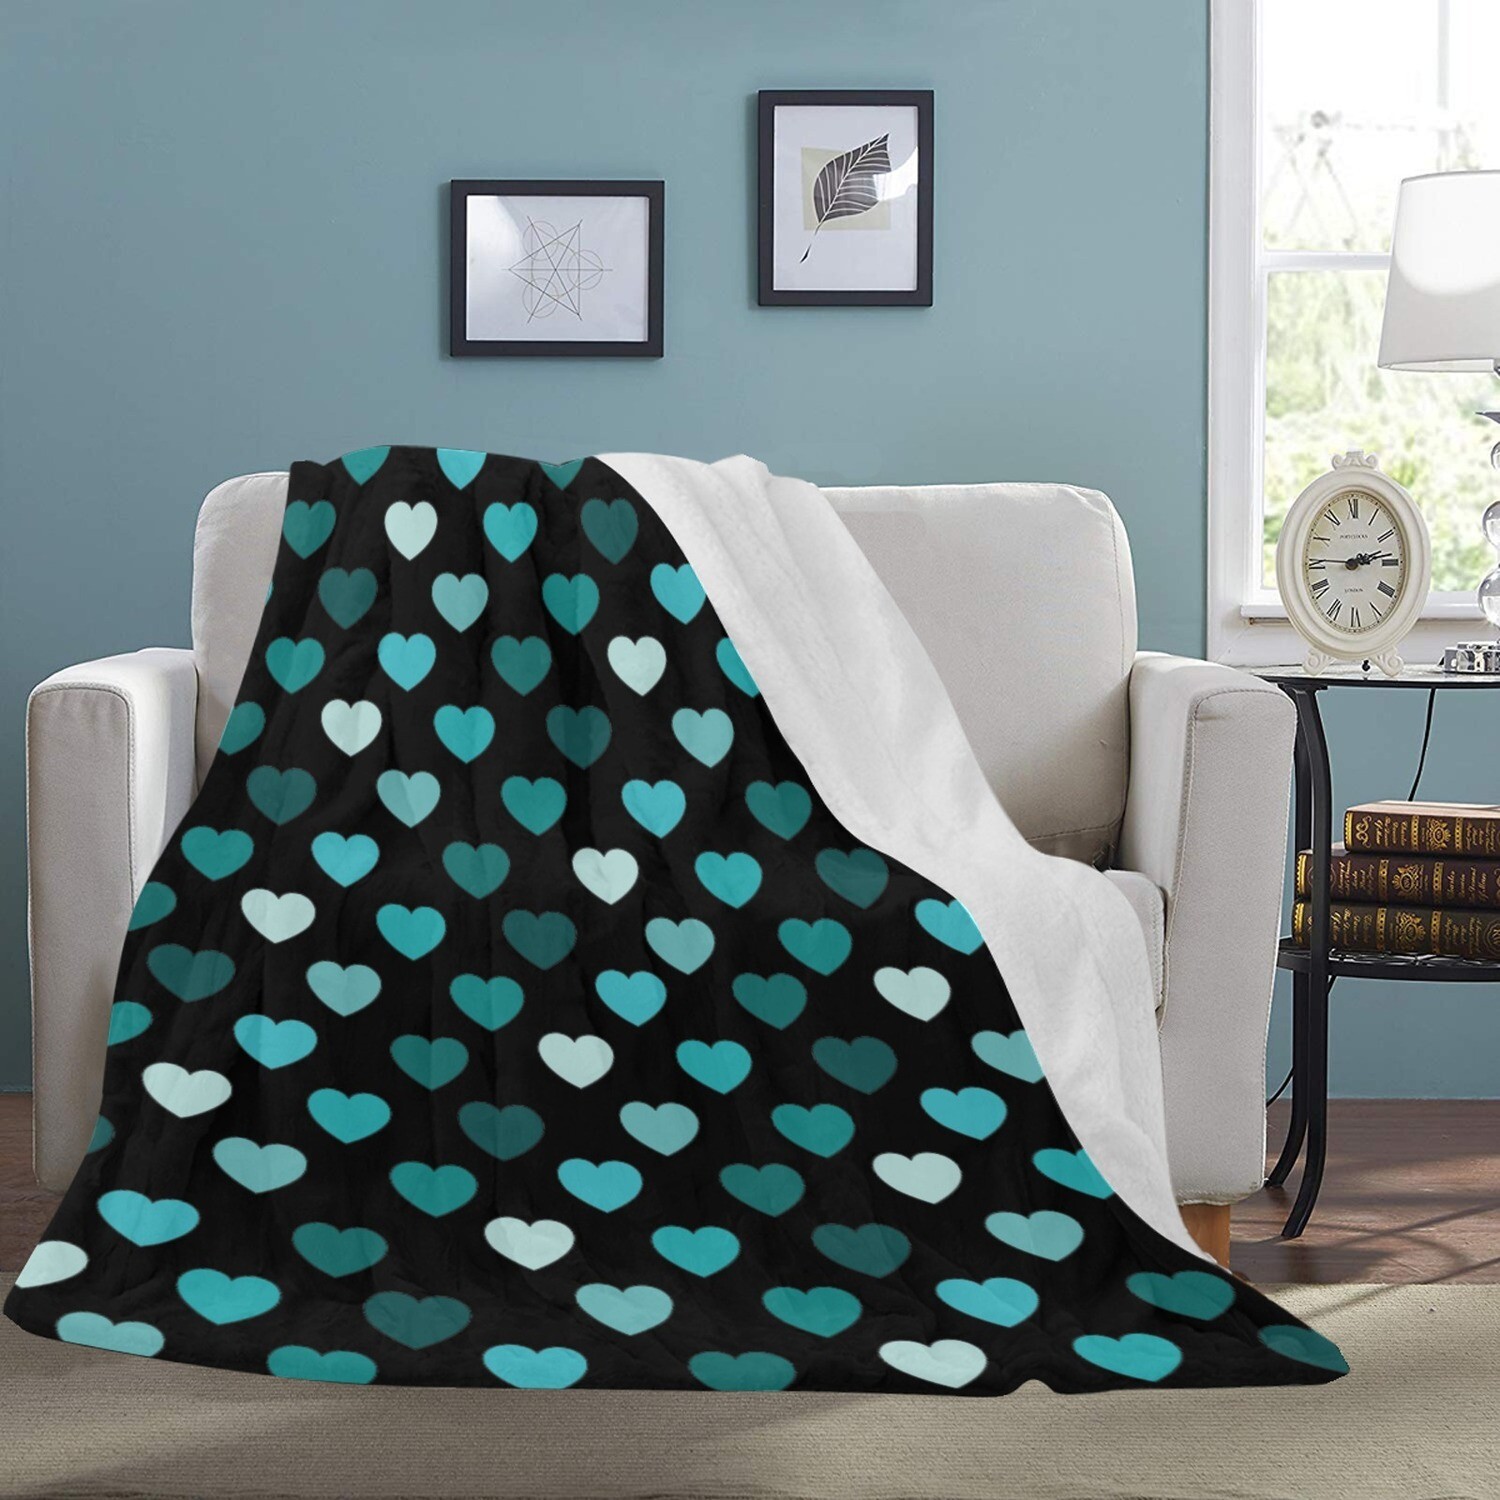 🤴🏽👸🏽💕Large Ultra-Soft Micro Fleece Blanket Shades of teal Hearts, gift, gift for her, gift for him, gift for them, 70"x80", black